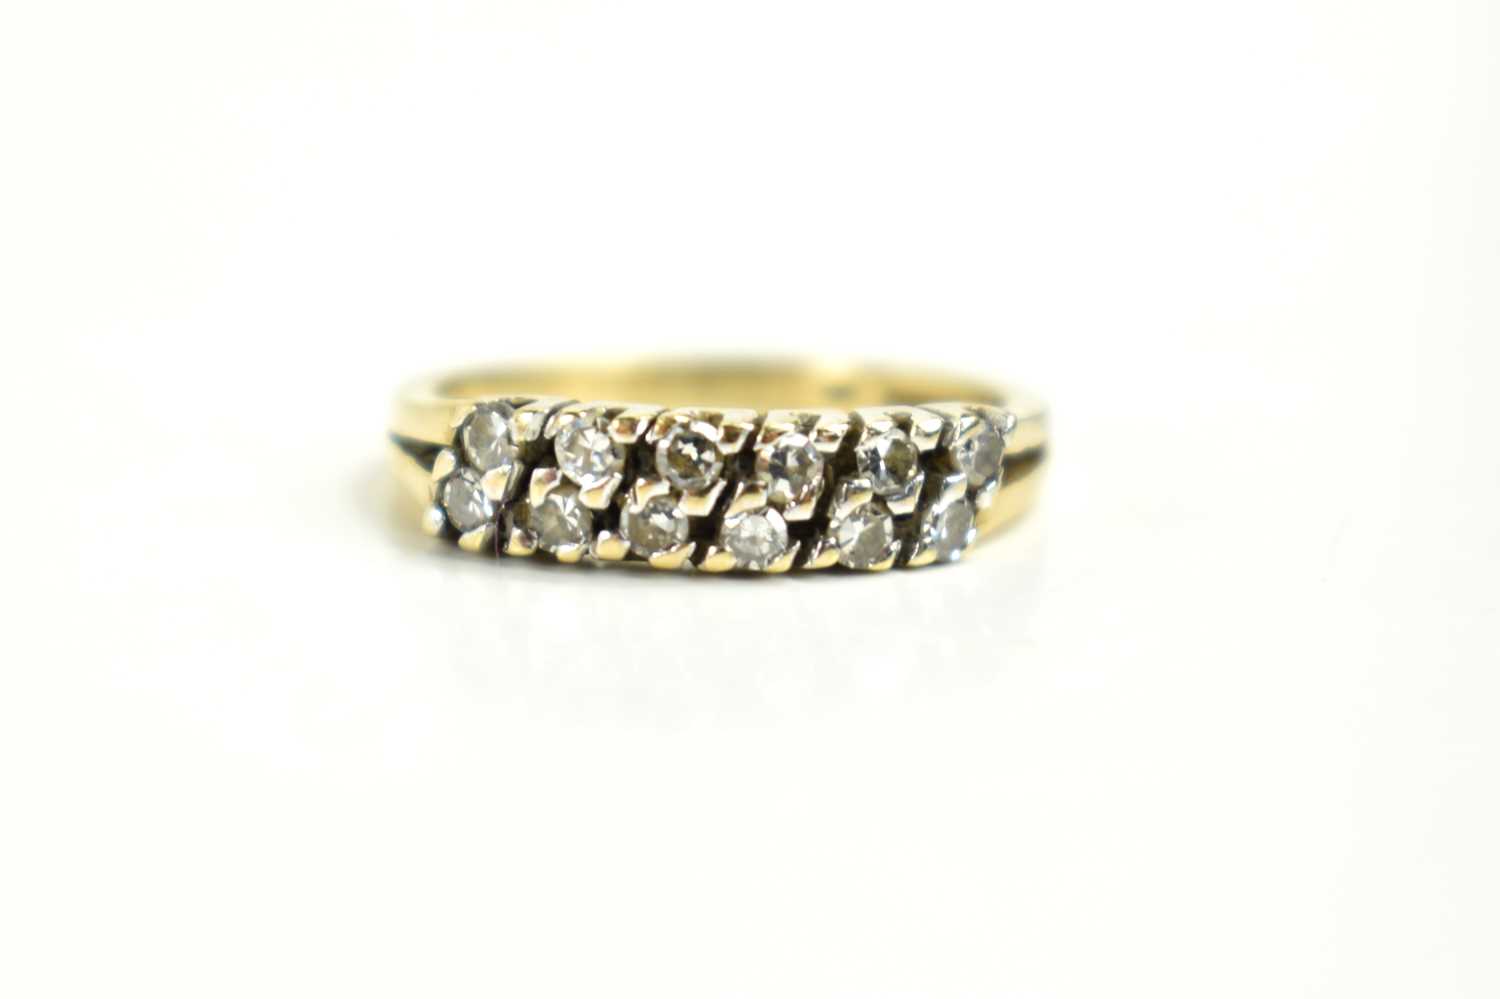 A 9ct gold and diamond twelve stone ring, the diamond brilliants set in six diagonal pairs, size